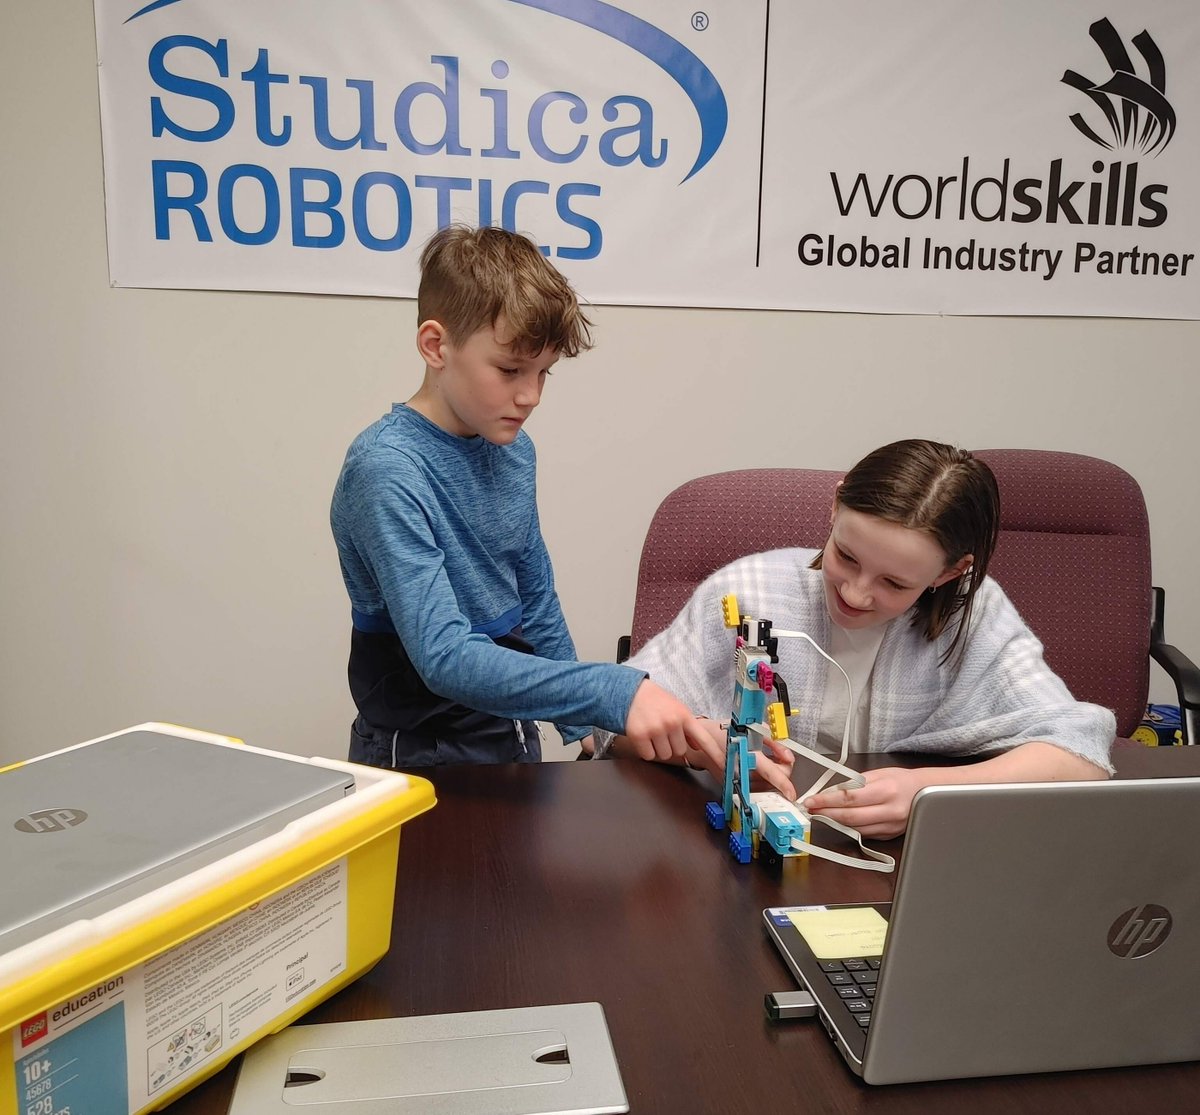 #TodayWePlay

The R&D Department at Studica Canada is hard at play! How are you rebuilding the world today?

#TodayWePlay #LEGOeducation #BricQMotion #SPIKEessential #OntarioCurriculum #PrimarySchool #StudicaSMART #SPIKEapp